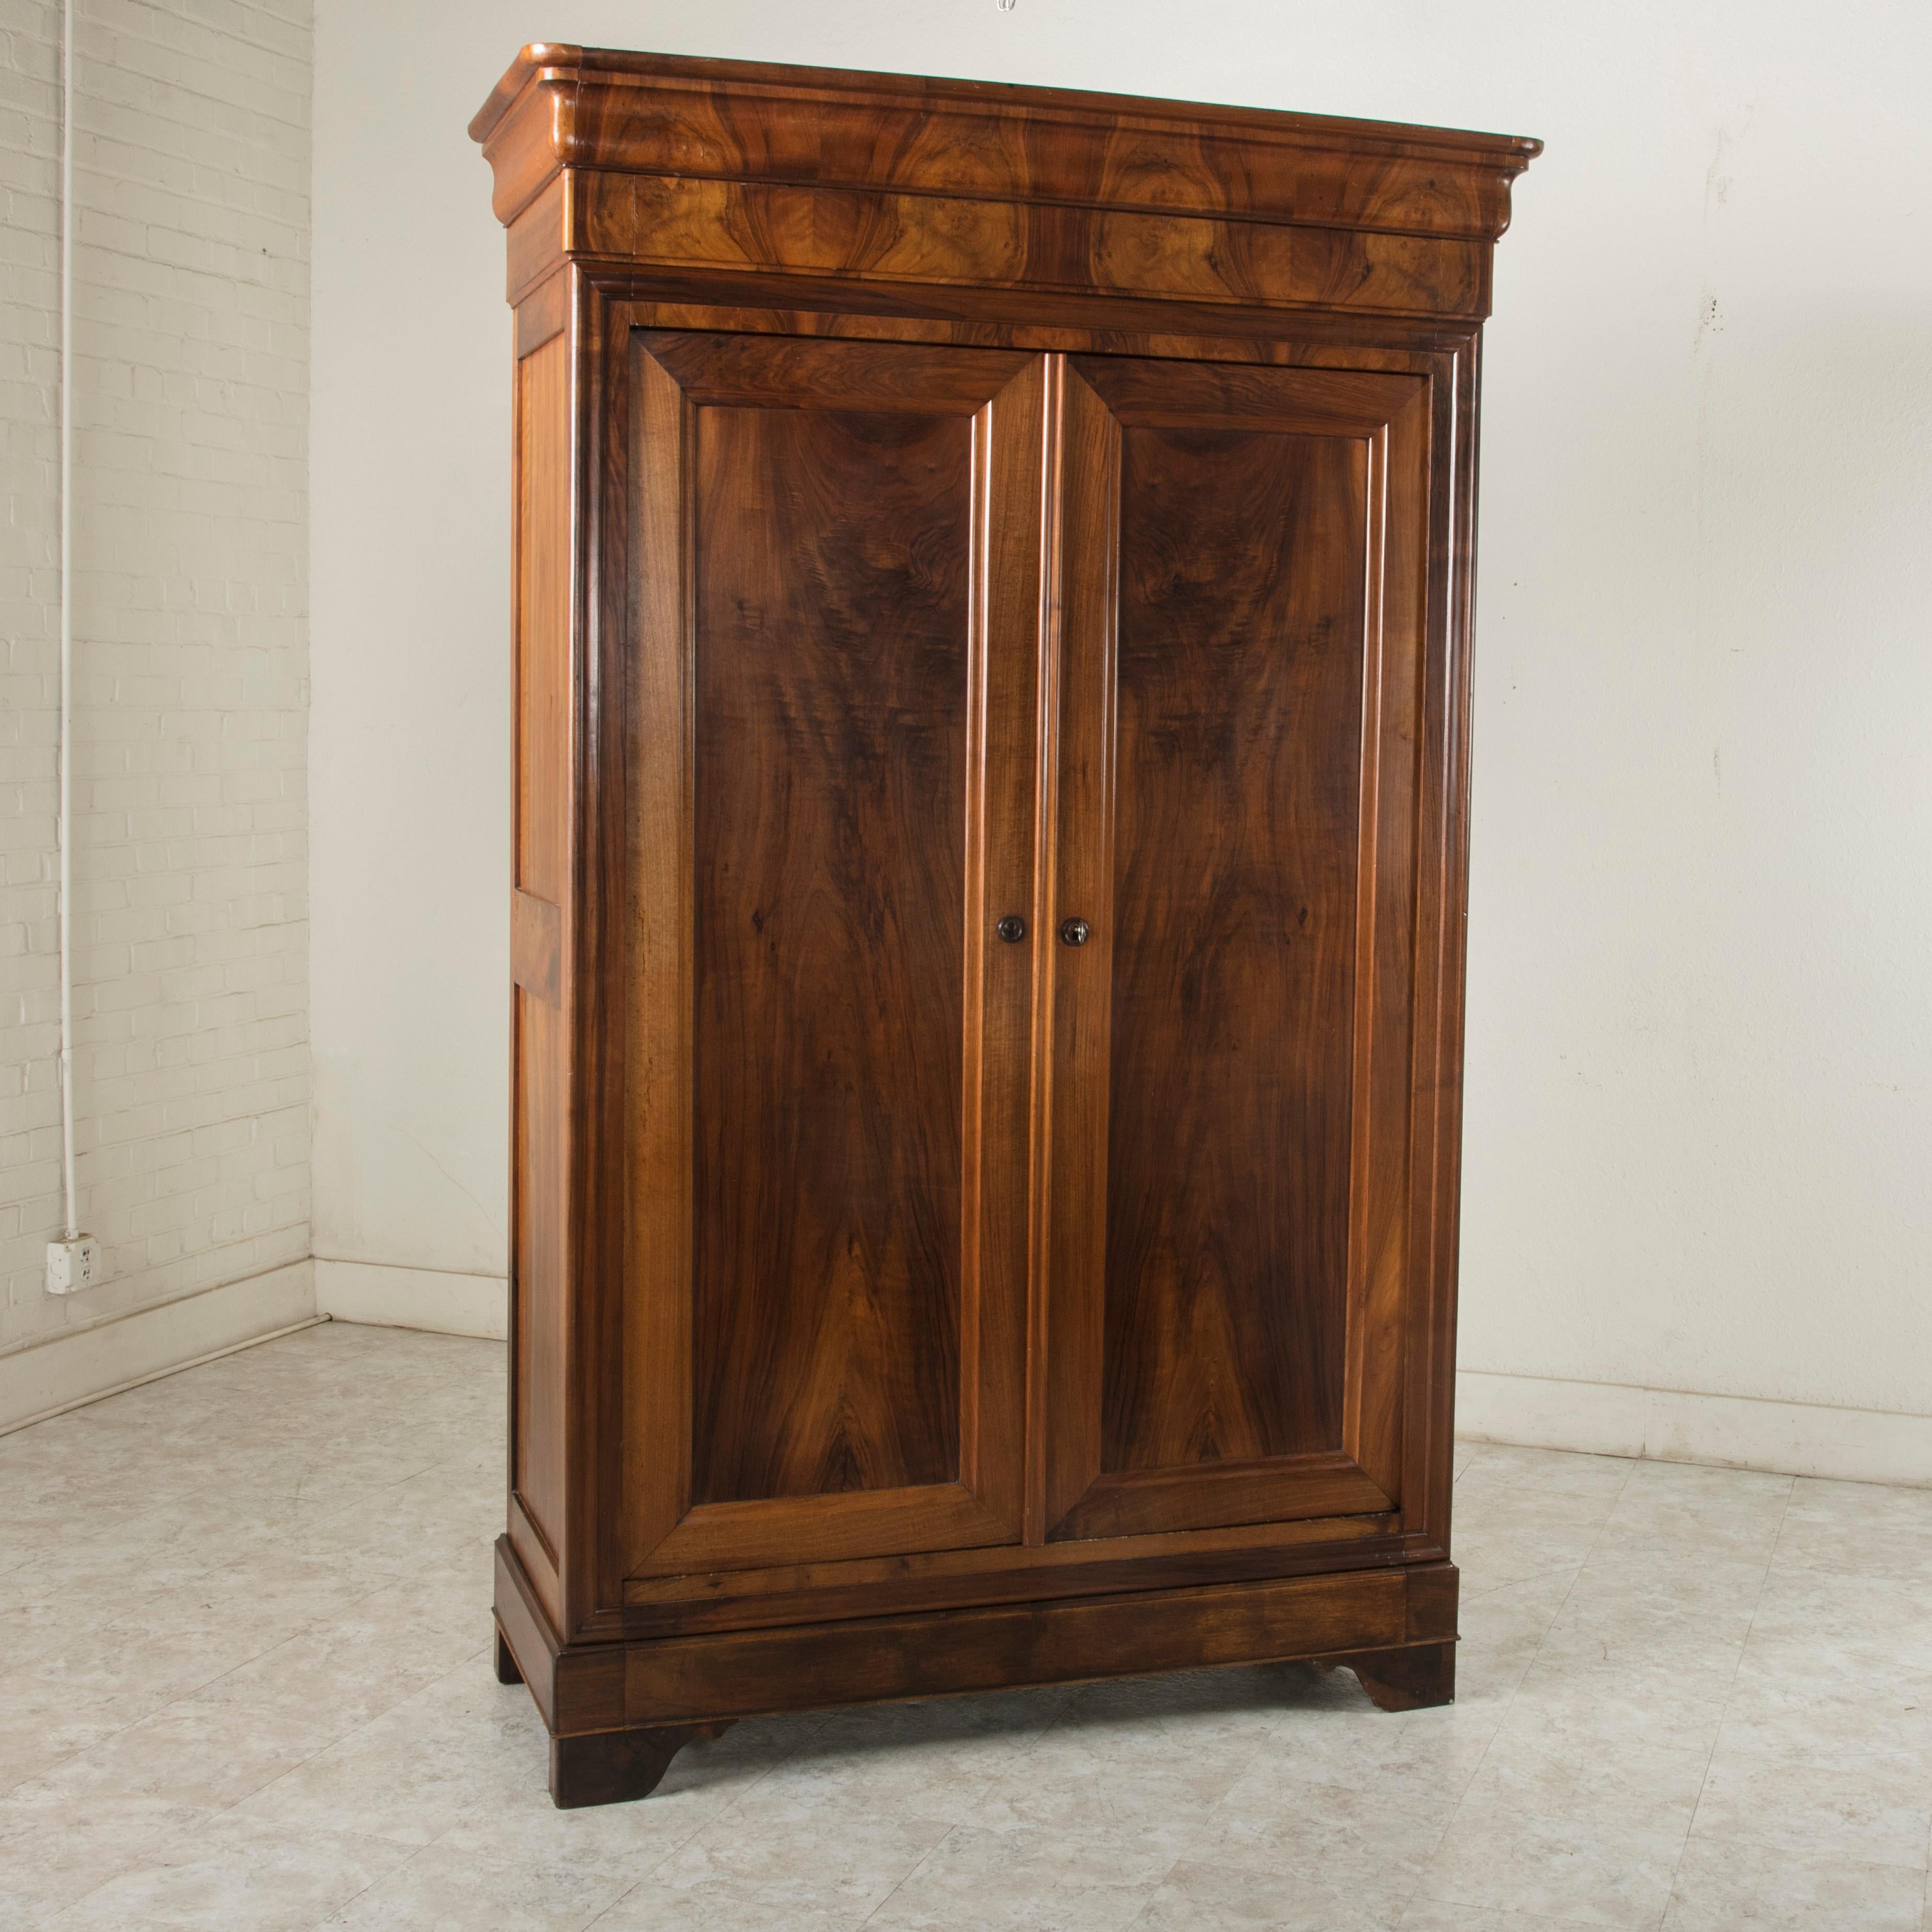 Found in Angers, a city in the Loire Valley castle region of France, this 19th century bookmatched walnut armoire features simple clean lines, the Classic distinction of the Louis Philippe style. A period piece, its solid paneled sides and doors